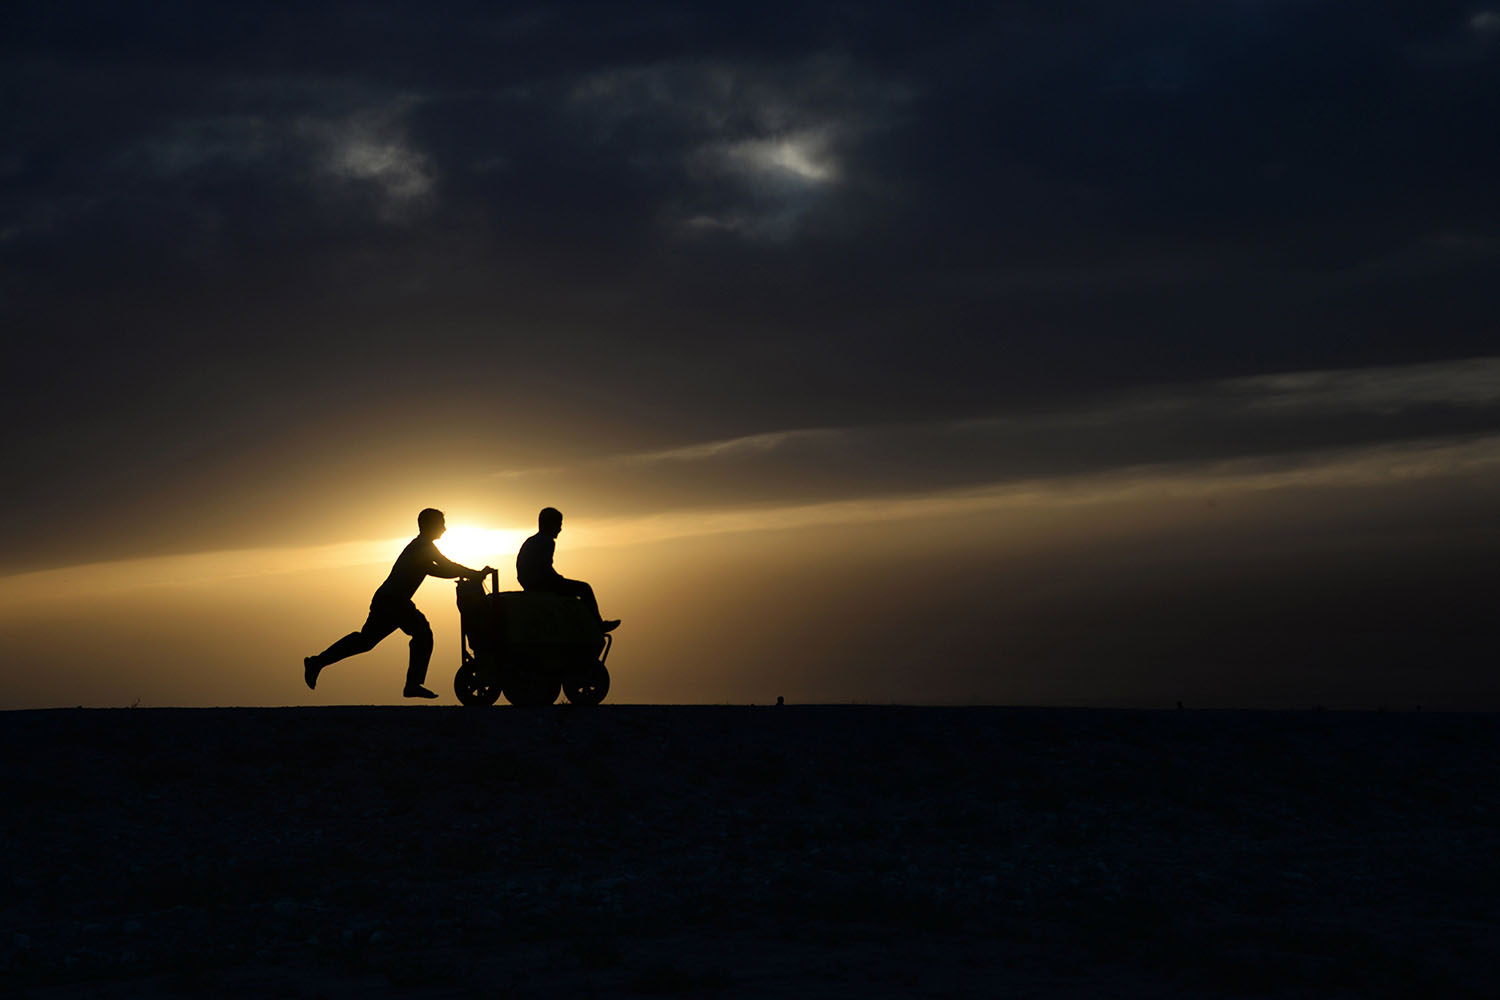 An Afghan youth pushes a friend on a ice-cream cart as the sun sets on the outskirts of Mazar Sharif on May 16, 2014.